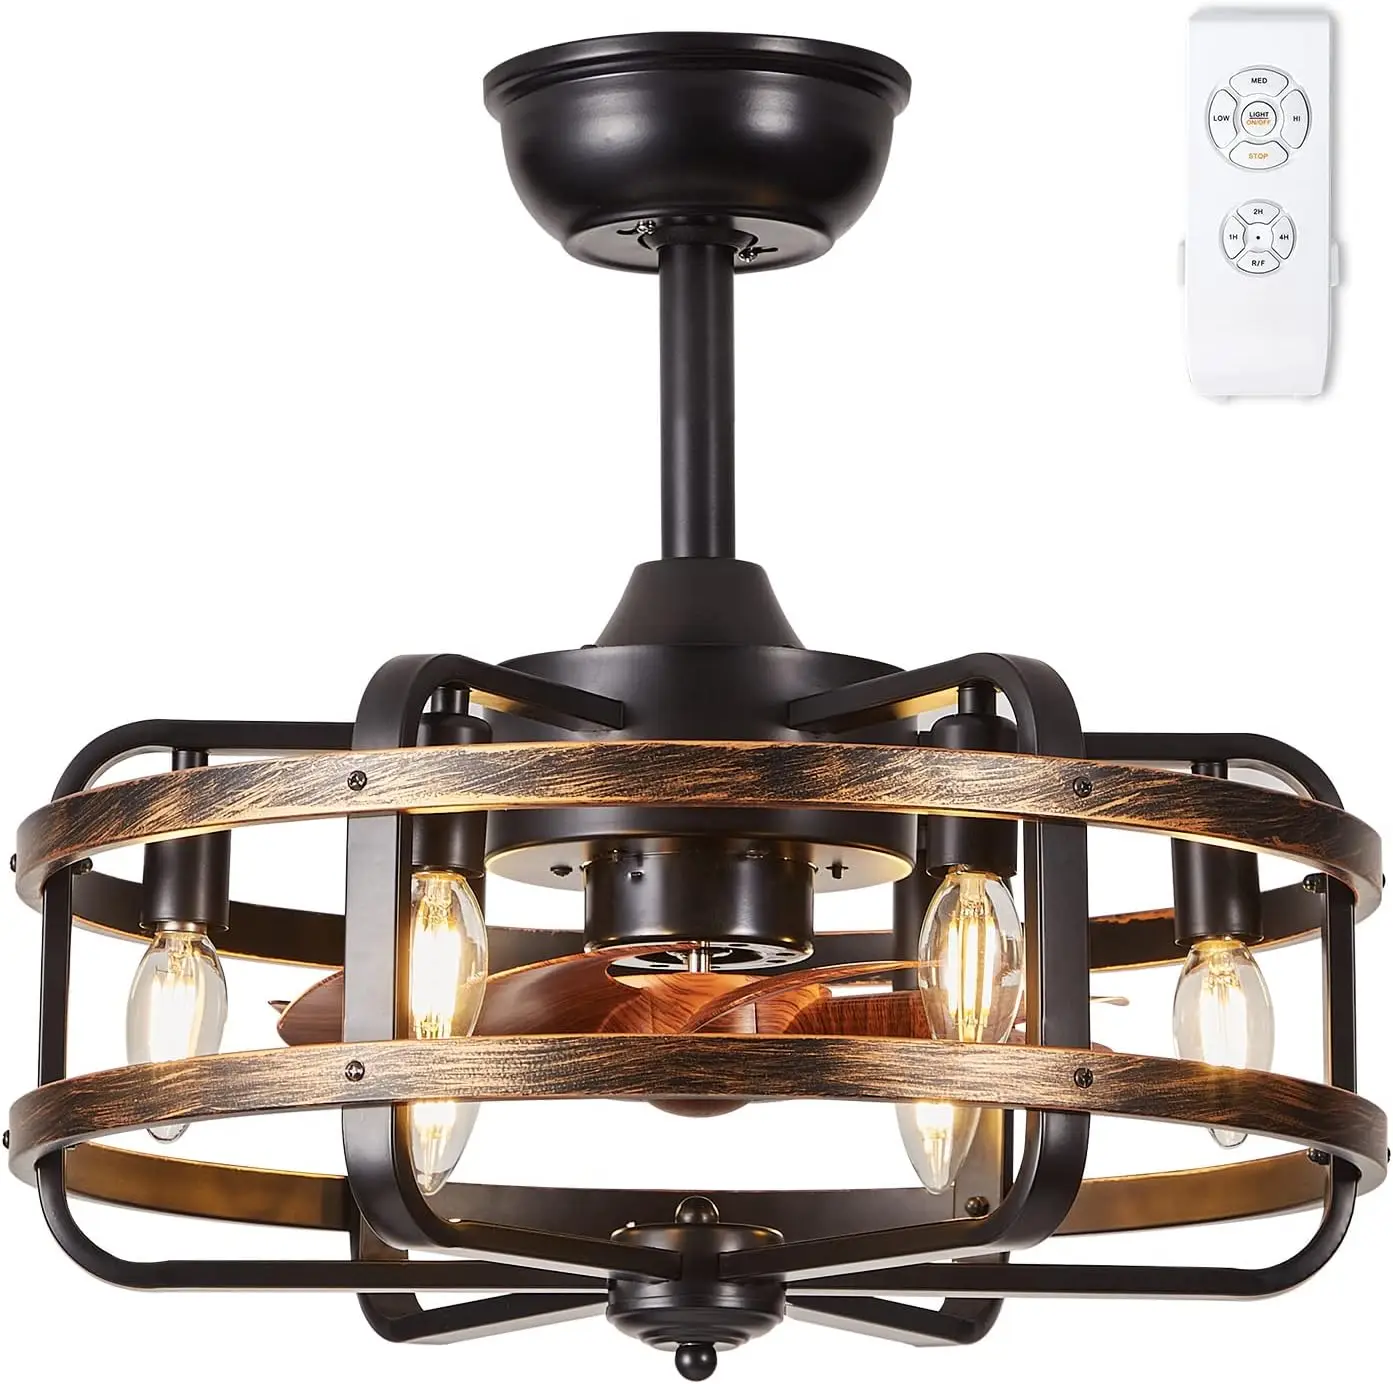 

Ceiling Fans with Lights Farmhouse, 18 Inch Flush Mount Vintage Bladeless Rustic Chandeliers Fan Remote Bedroom 6 Light E12 Bulb